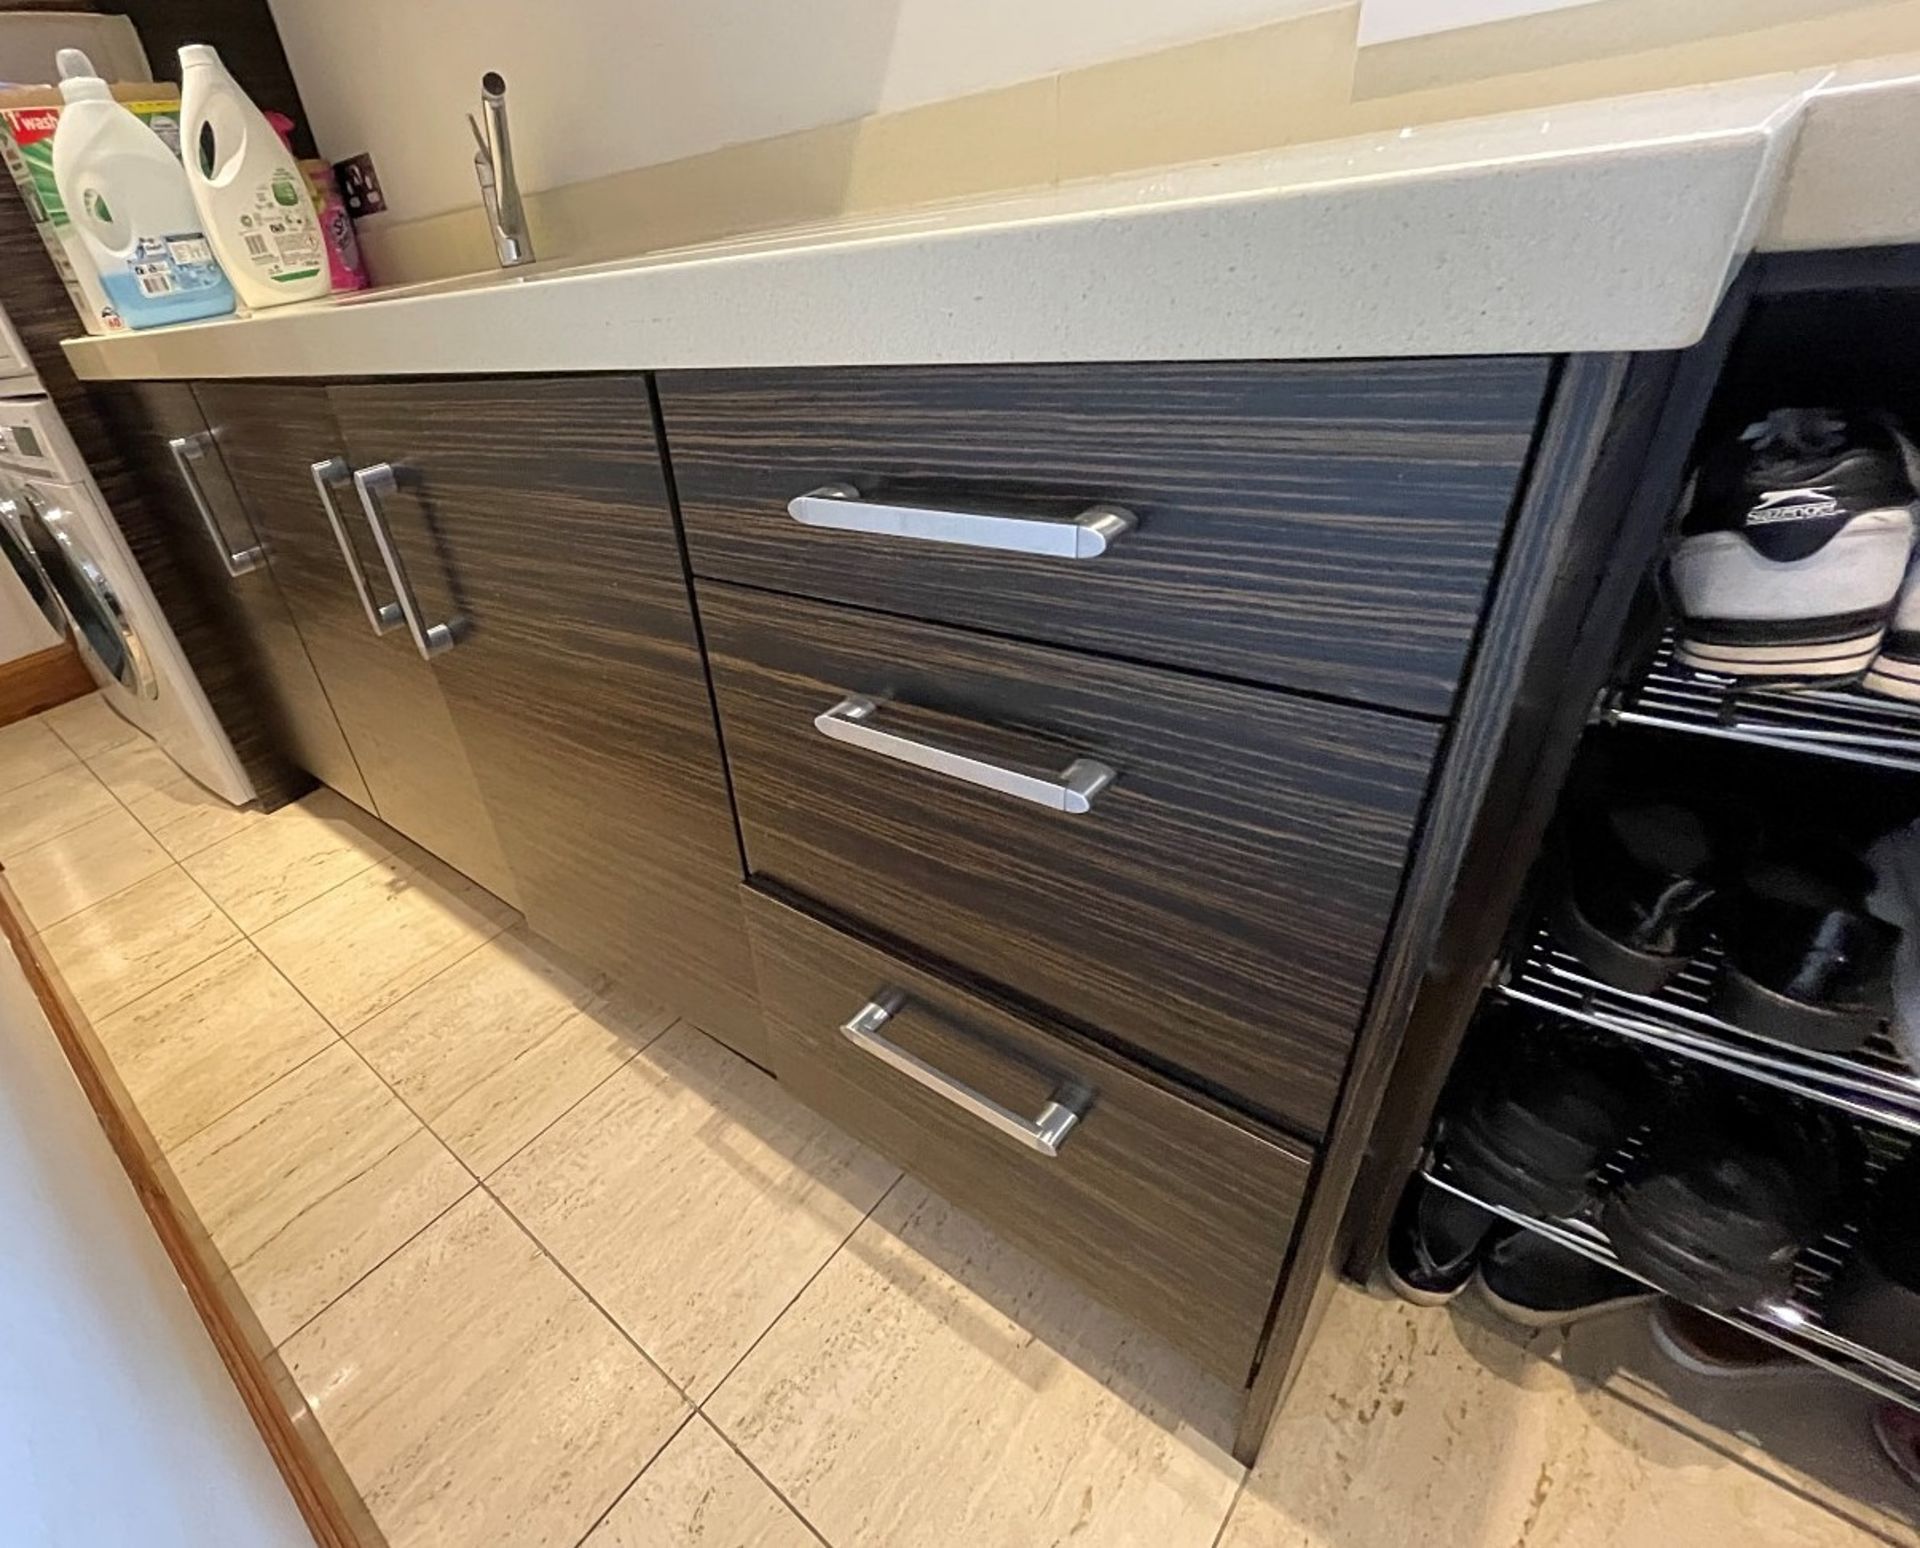 1 x Bespoke Fitted Mowlem & Co Utility Room - Includes Storage Cabinets, Sink And Granite Worktops - - Image 7 of 28